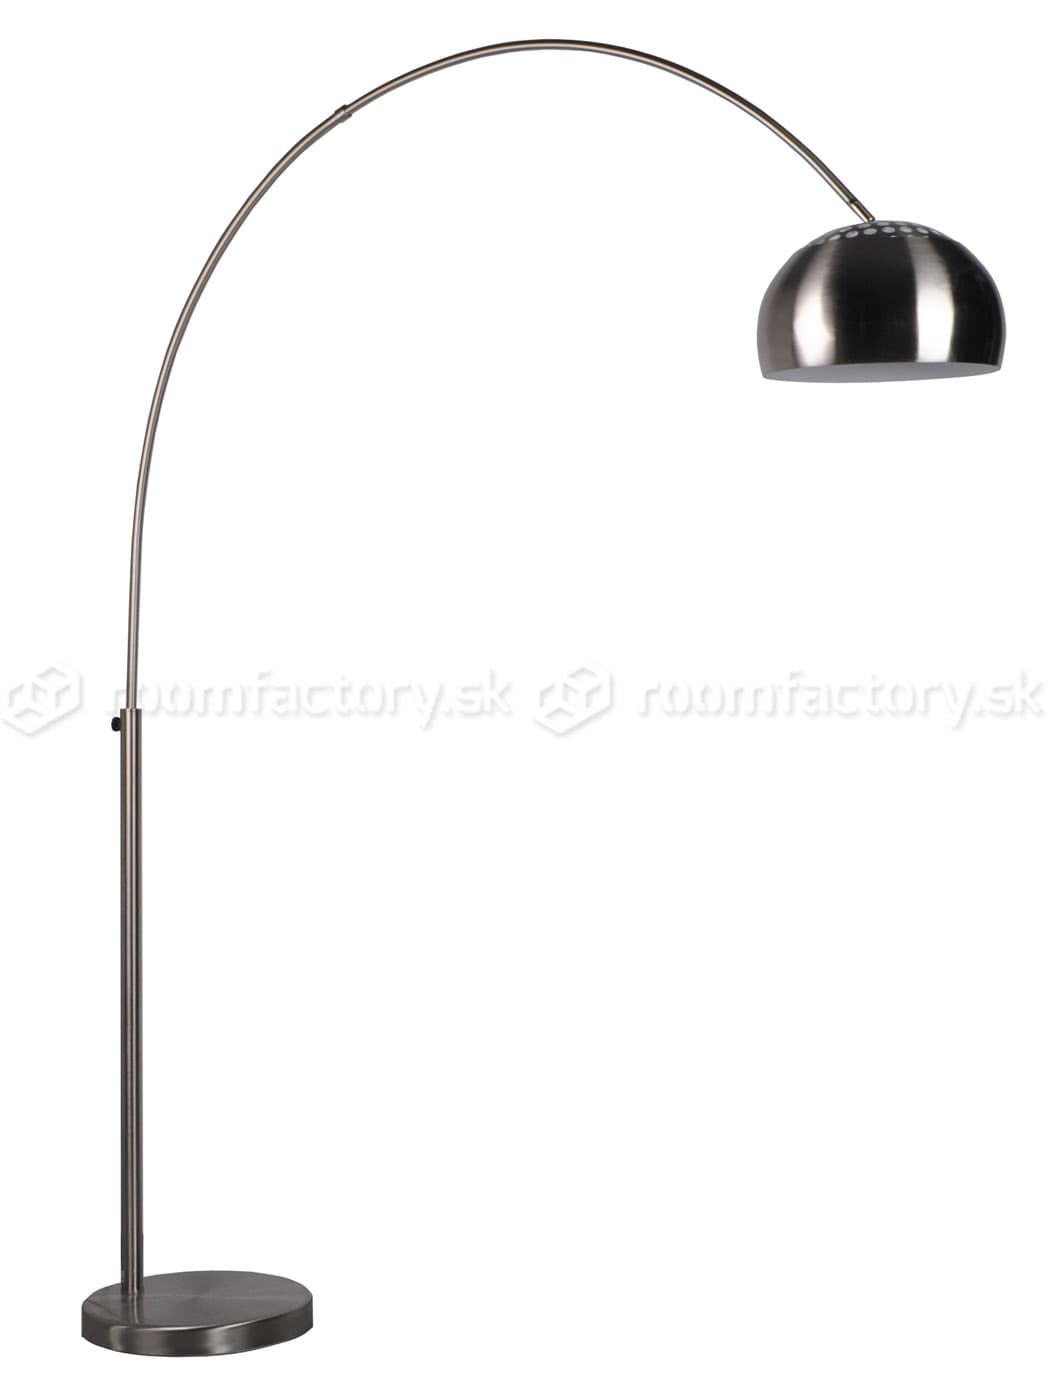 Heading As fast as a flash lung WL-Living Metal Bow New stojanová lampa | ROOMFACTORY.sk